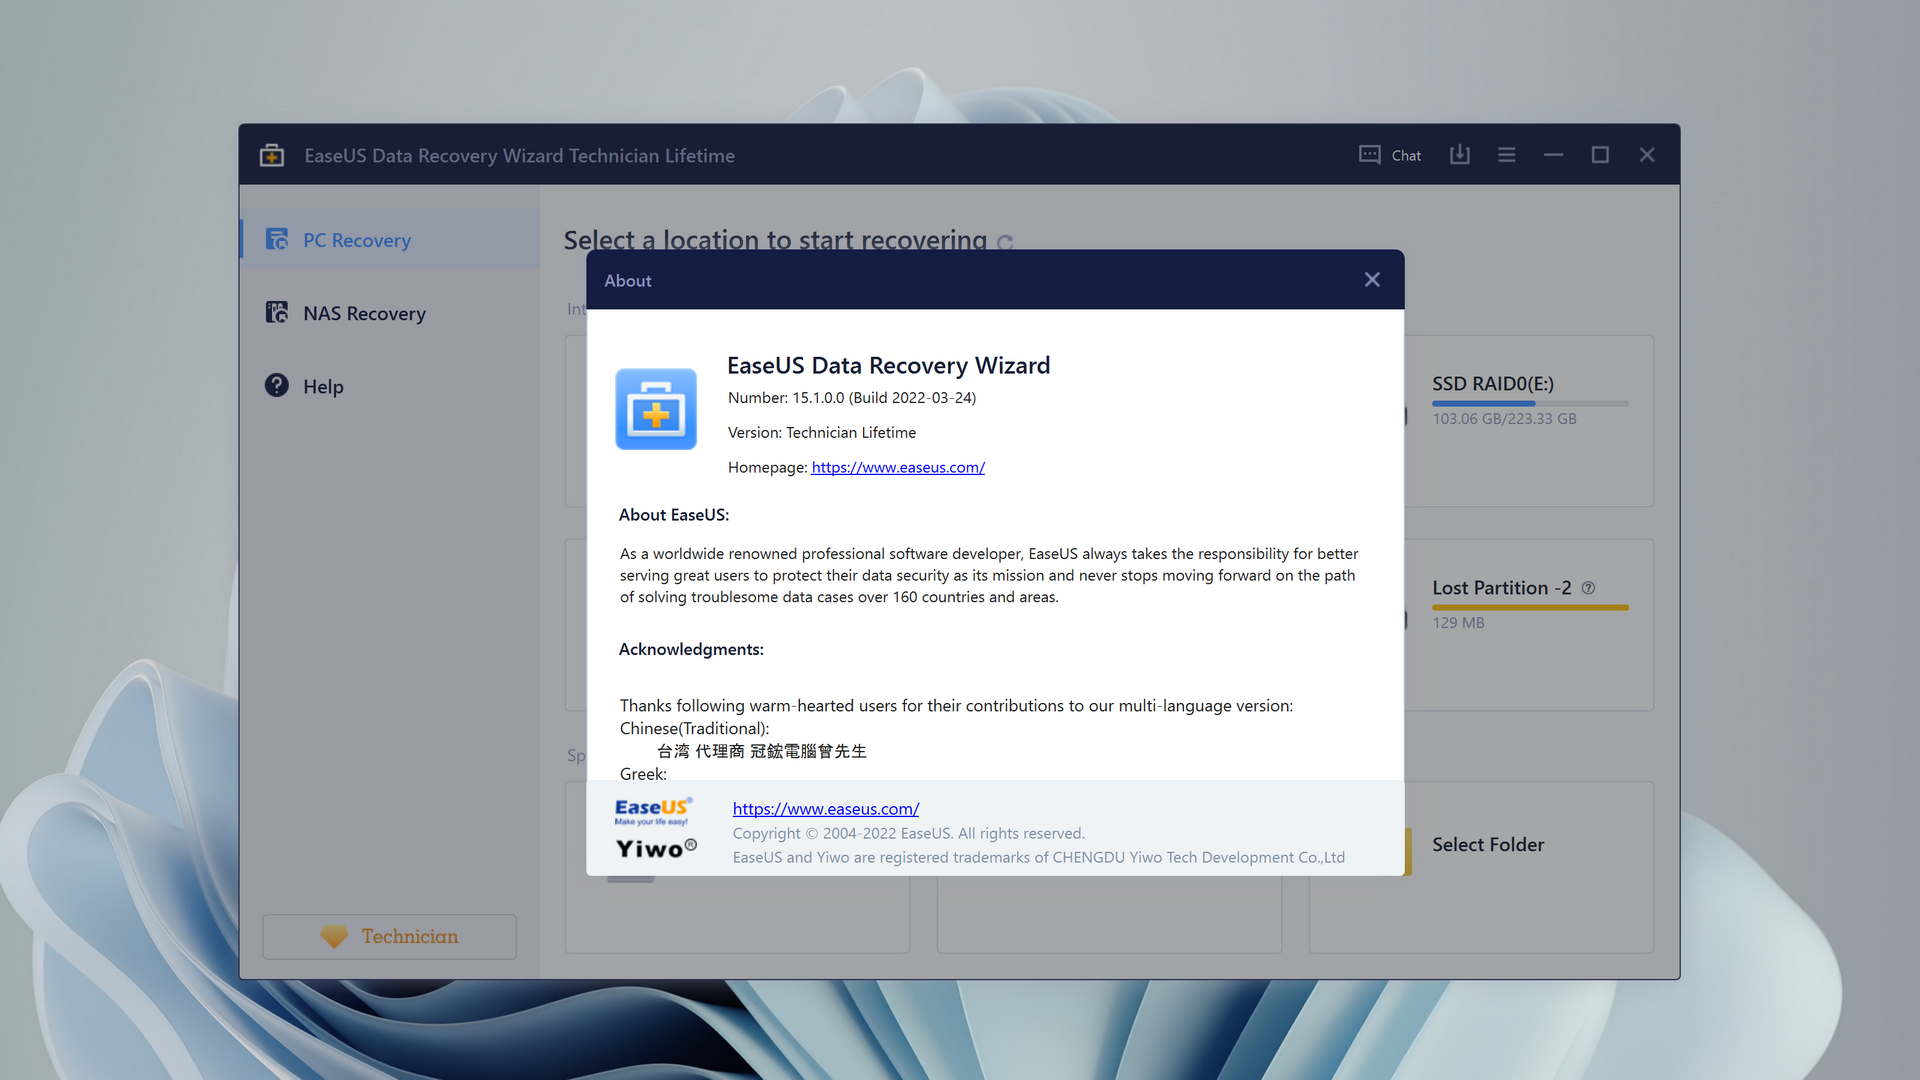 easeus data recovery wizard about window